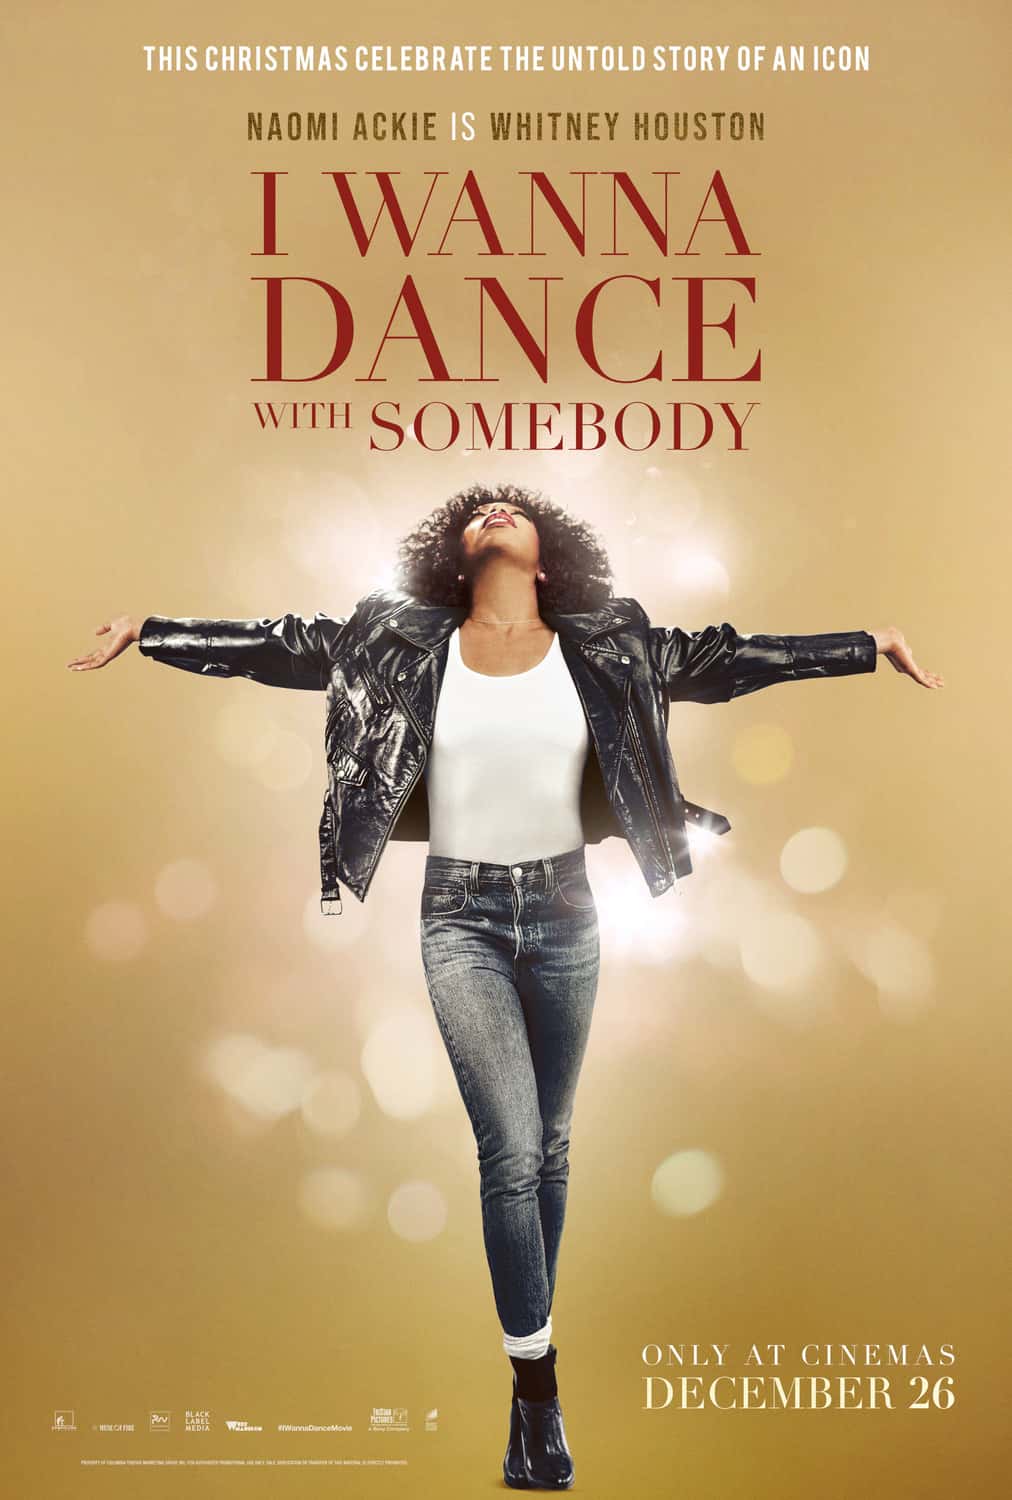 This weeks UK new movie preview 30th December 2022 - I Wanna Dance With Somebody and Corsage - #iwannadancewithsomebody #corsage